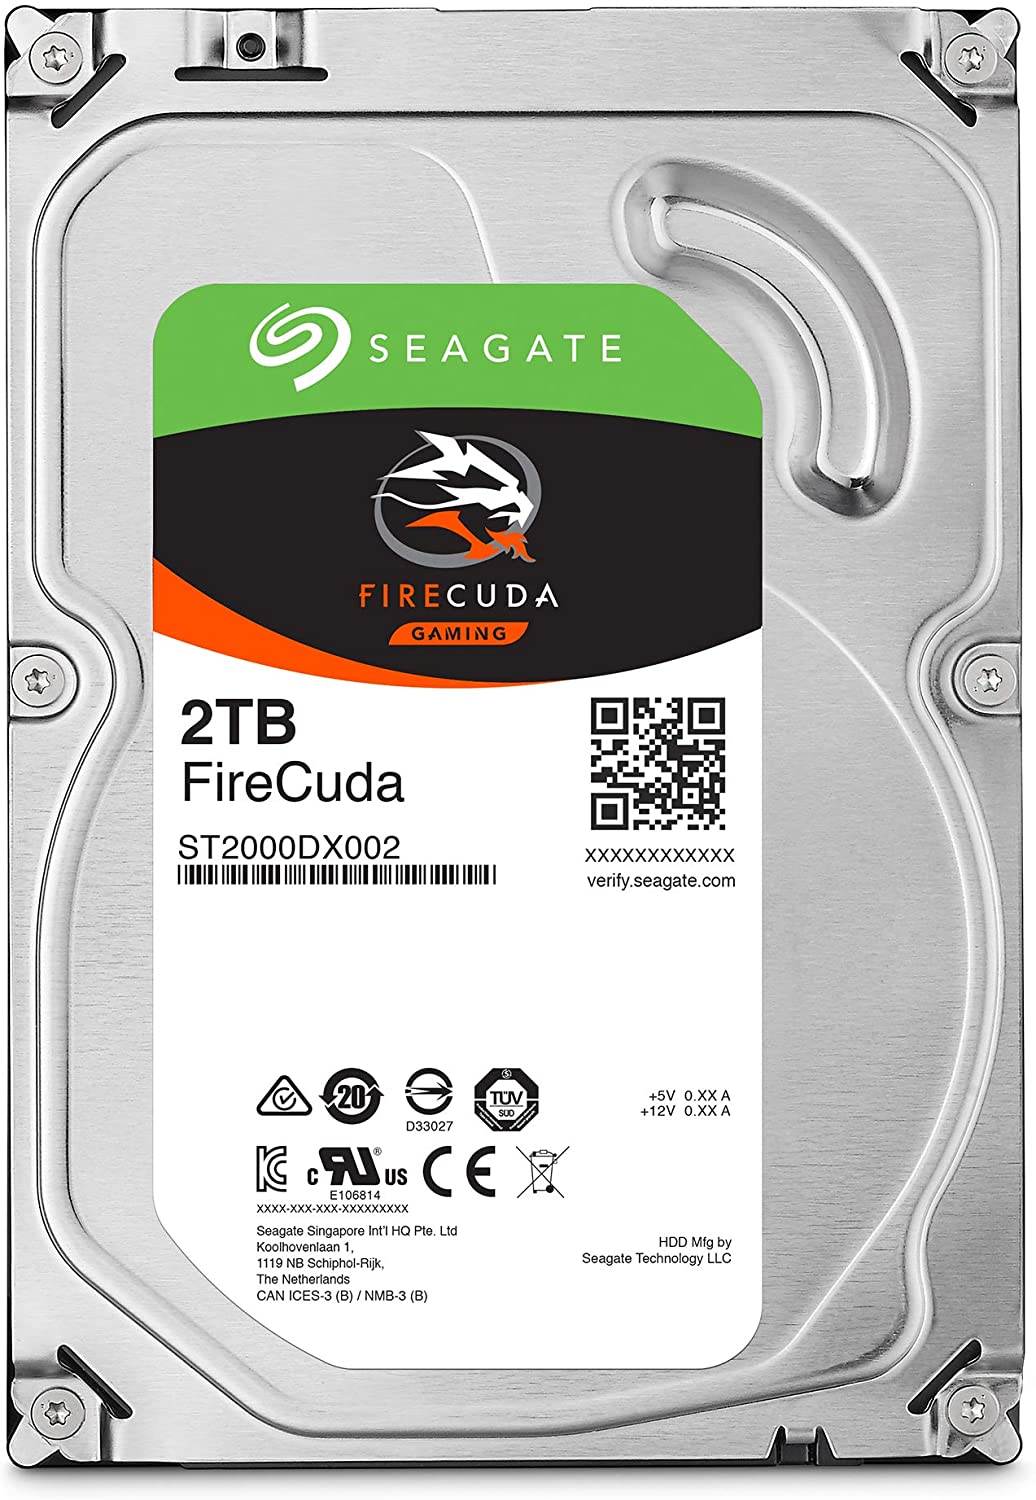 Seagate FireCuda 2TB Solid State Hybrid Drive Performance SSHD – 3.5 Inch SATA 6Gb/s Flash Accelerated for Gaming PC Desktop (ST2000DX002)